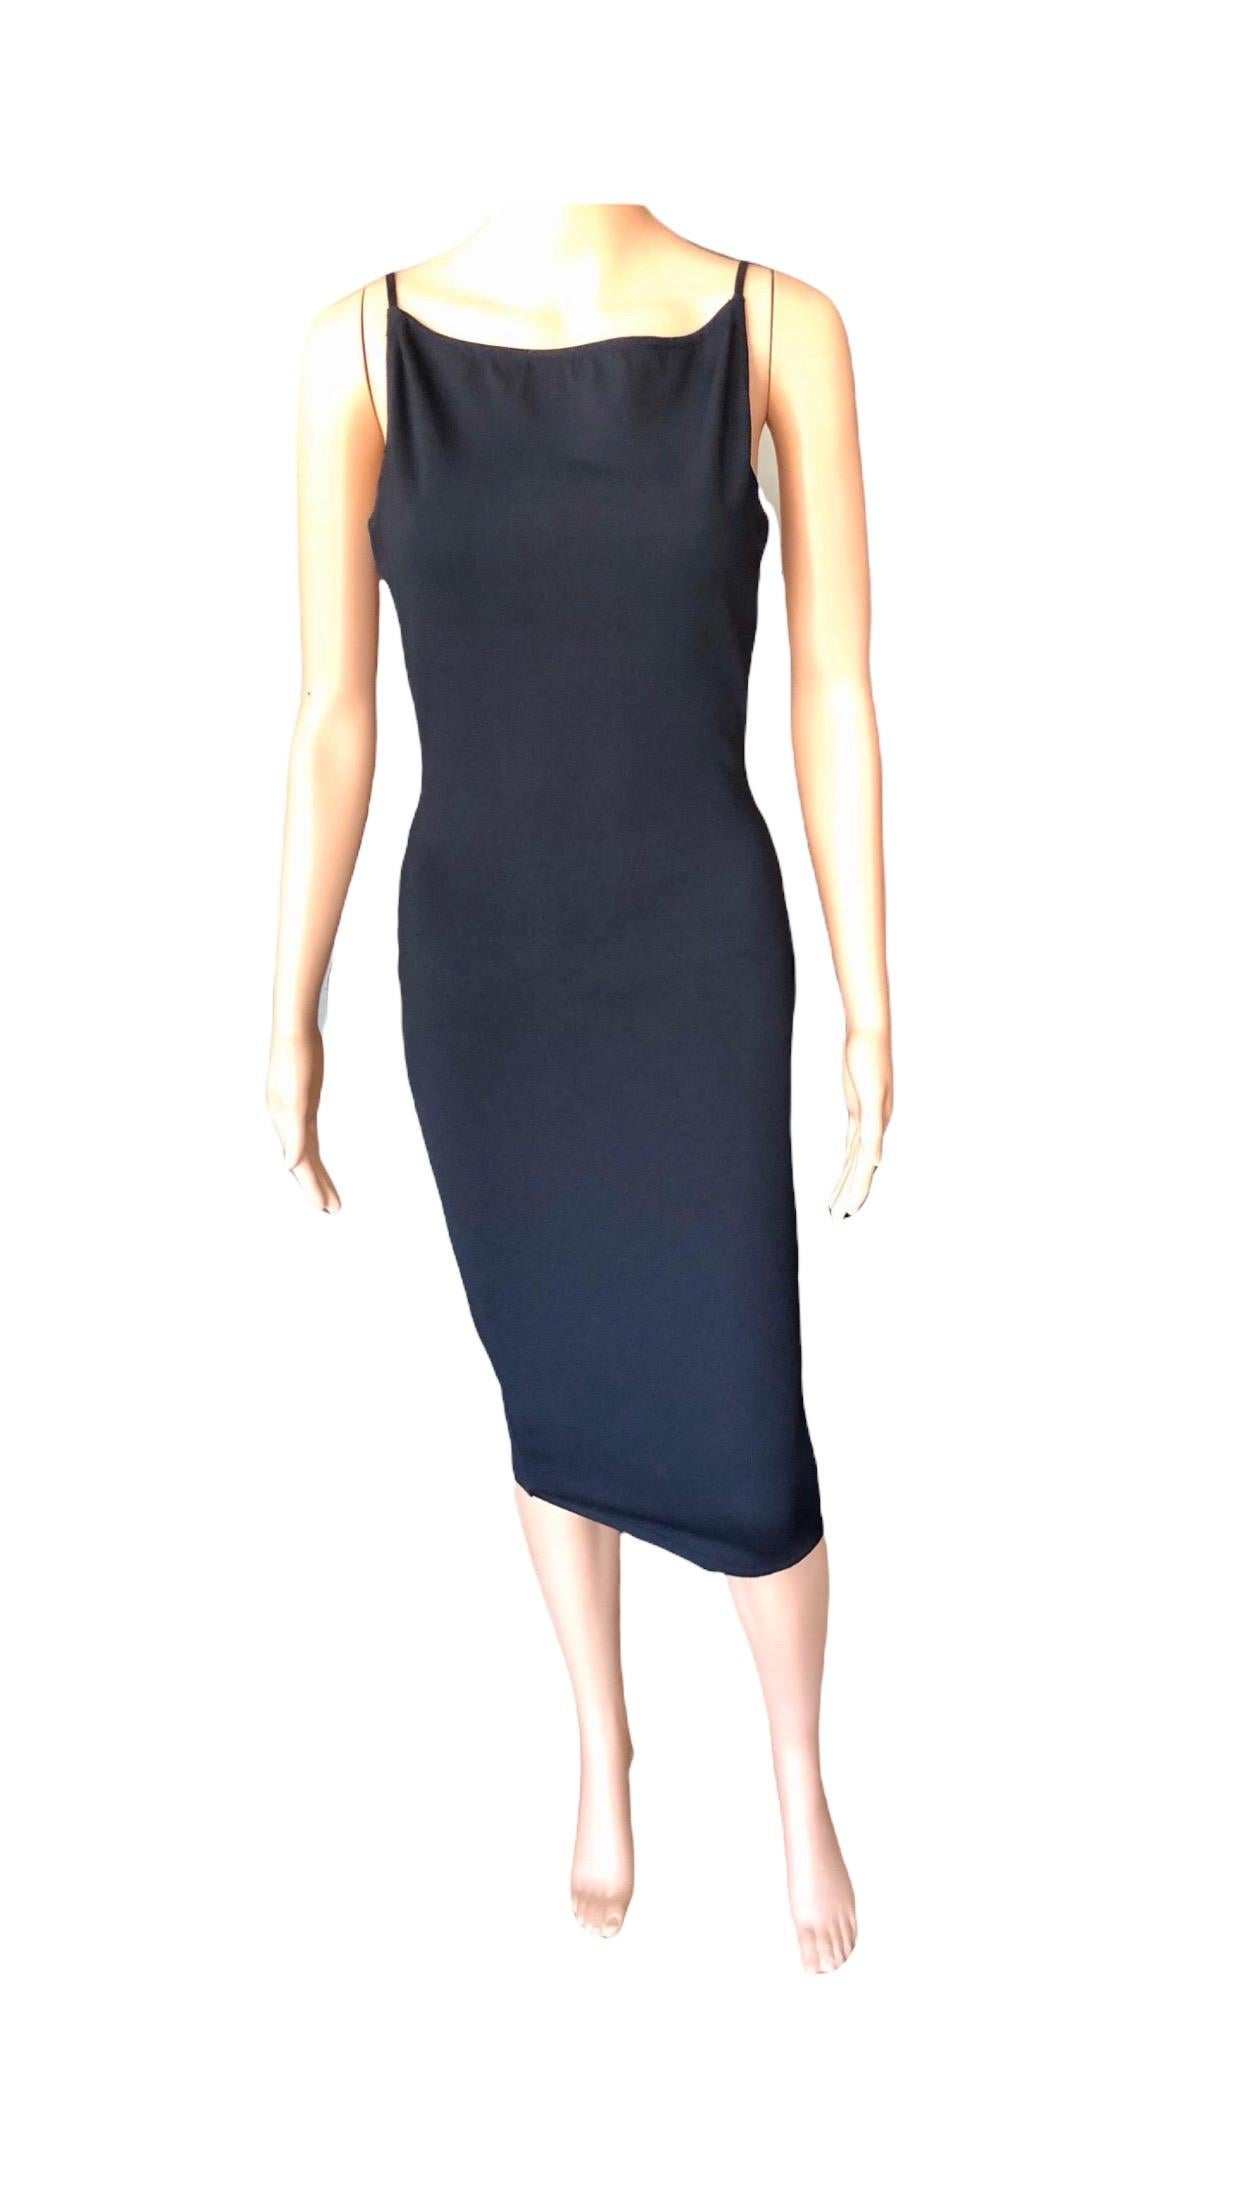 Tom Ford for Gucci S/S 1998 Bodycon Backless Buckle Straps Knit Black Midi Dress For Sale 7